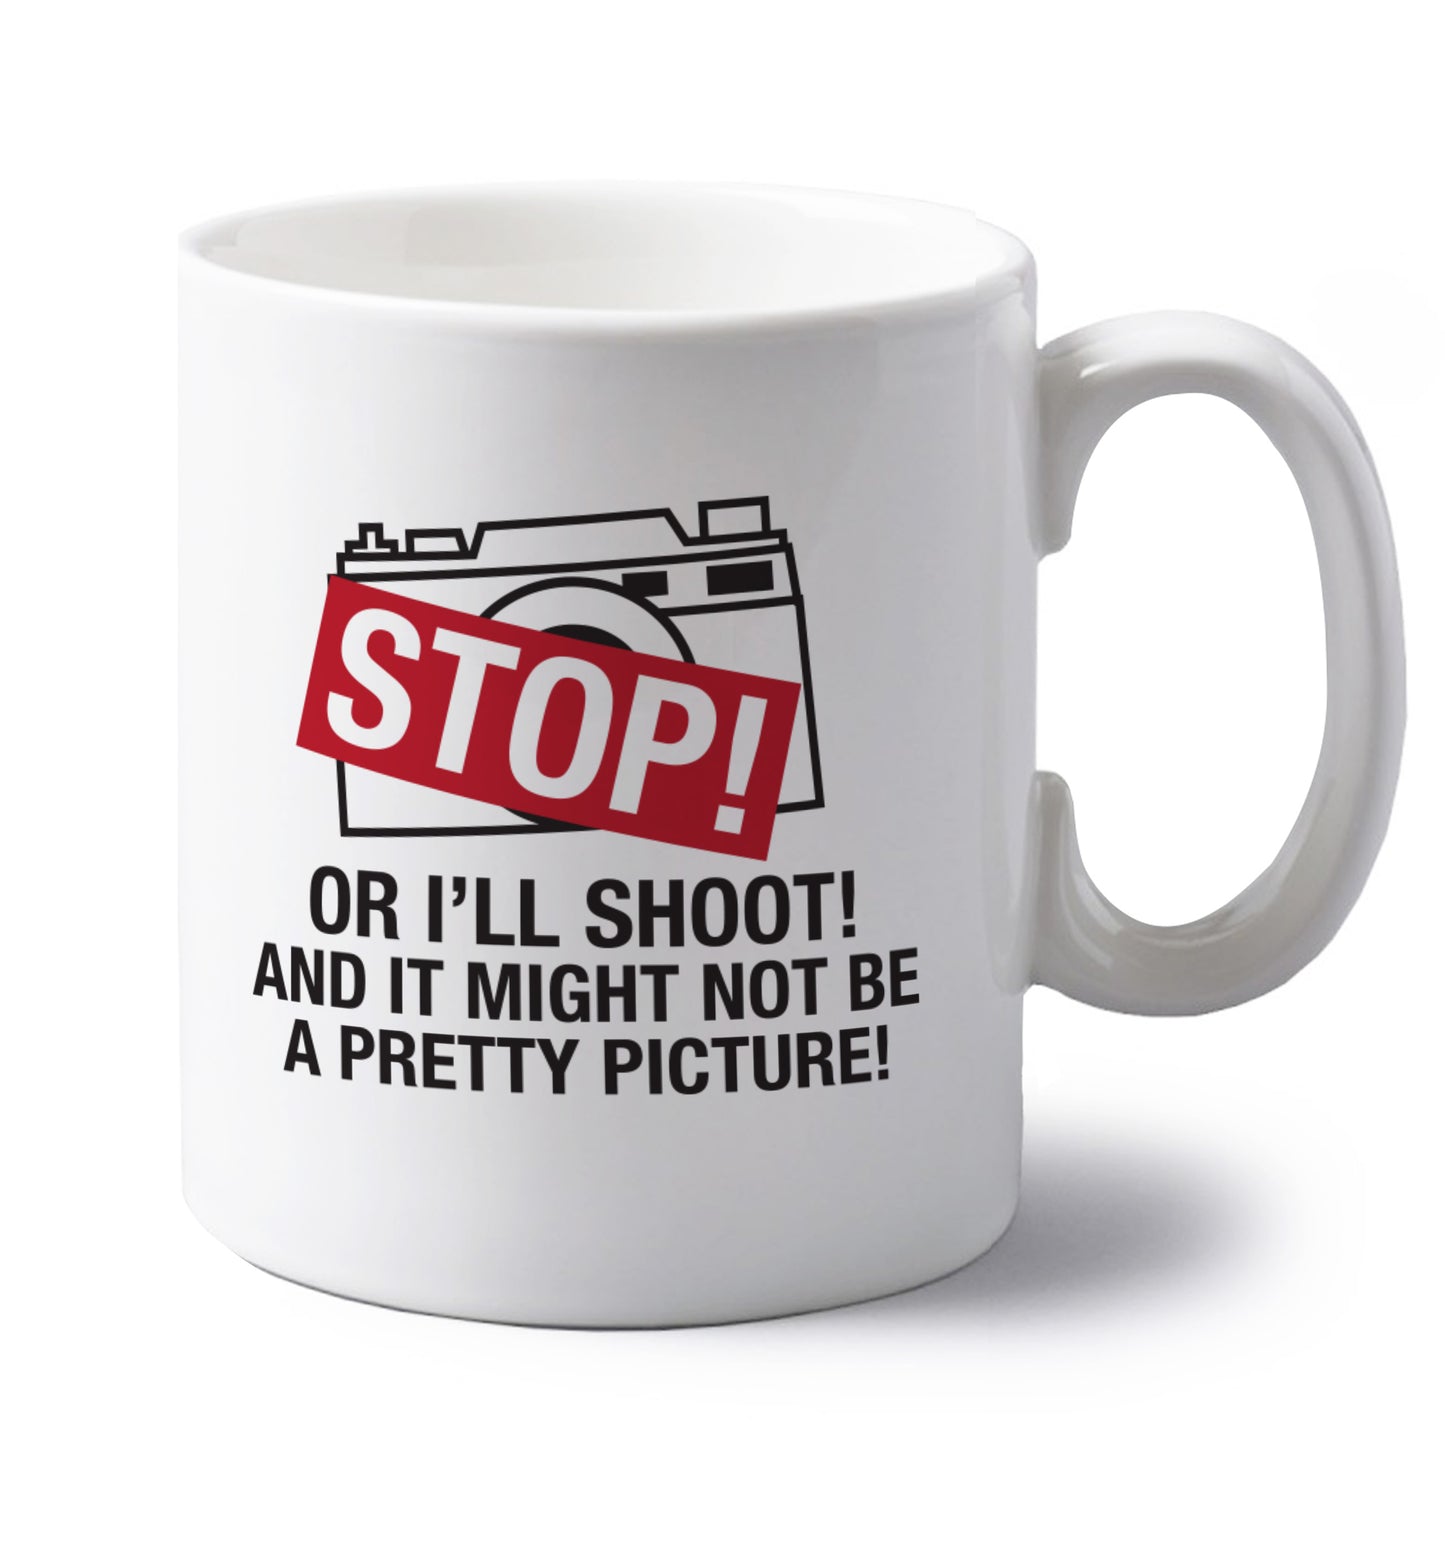 Stop or I'll shoot and it won't be a pretty picture left handed white ceramic mug 